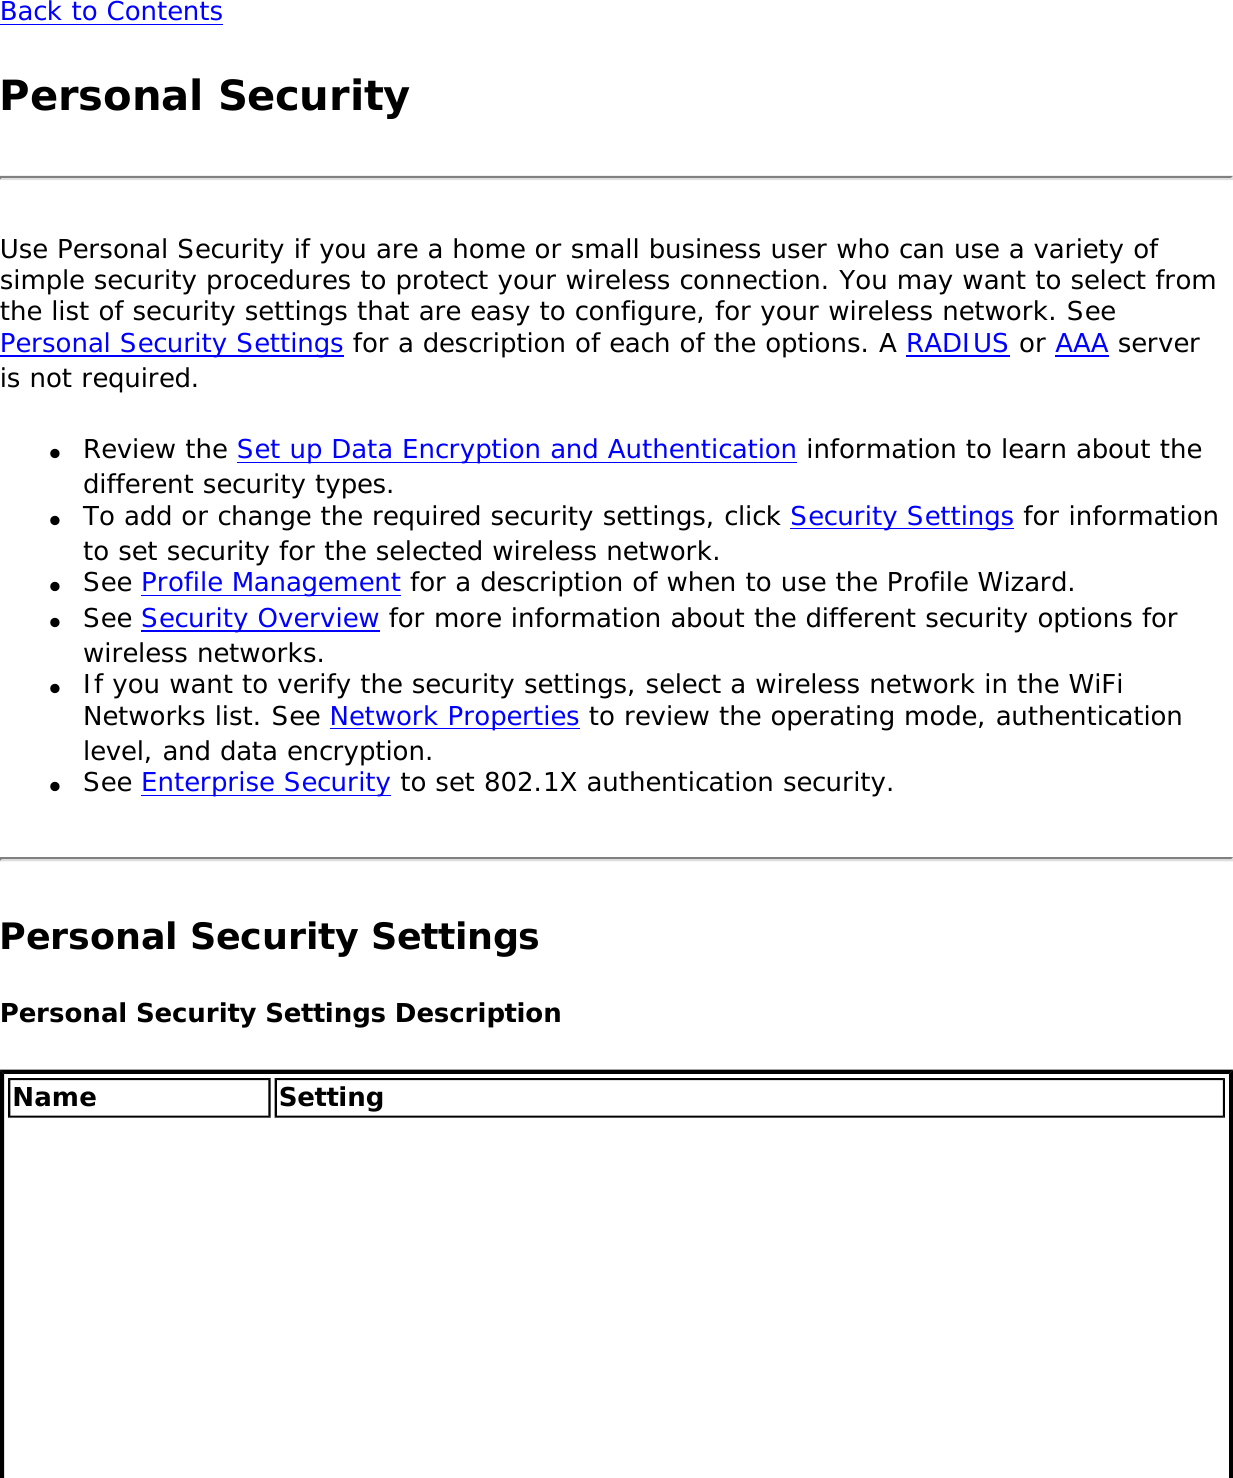 Back to ContentsPersonal SecurityUse Personal Security if you are a home or small business user who can use a variety of simple security procedures to protect your wireless connection. You may want to select from the list of security settings that are easy to configure, for your wireless network. See Personal Security Settings for a description of each of the options. A RADIUS or AAA server is not required. ●     Review the Set up Data Encryption and Authentication information to learn about the different security types. ●     To add or change the required security settings, click Security Settings for information to set security for the selected wireless network.●     See Profile Management for a description of when to use the Profile Wizard. ●     See Security Overview for more information about the different security options for wireless networks. ●     If you want to verify the security settings, select a wireless network in the WiFi Networks list. See Network Properties to review the operating mode, authentication level, and data encryption. ●     See Enterprise Security to set 802.1X authentication security.Personal Security SettingsPersonal Security Settings DescriptionName Setting